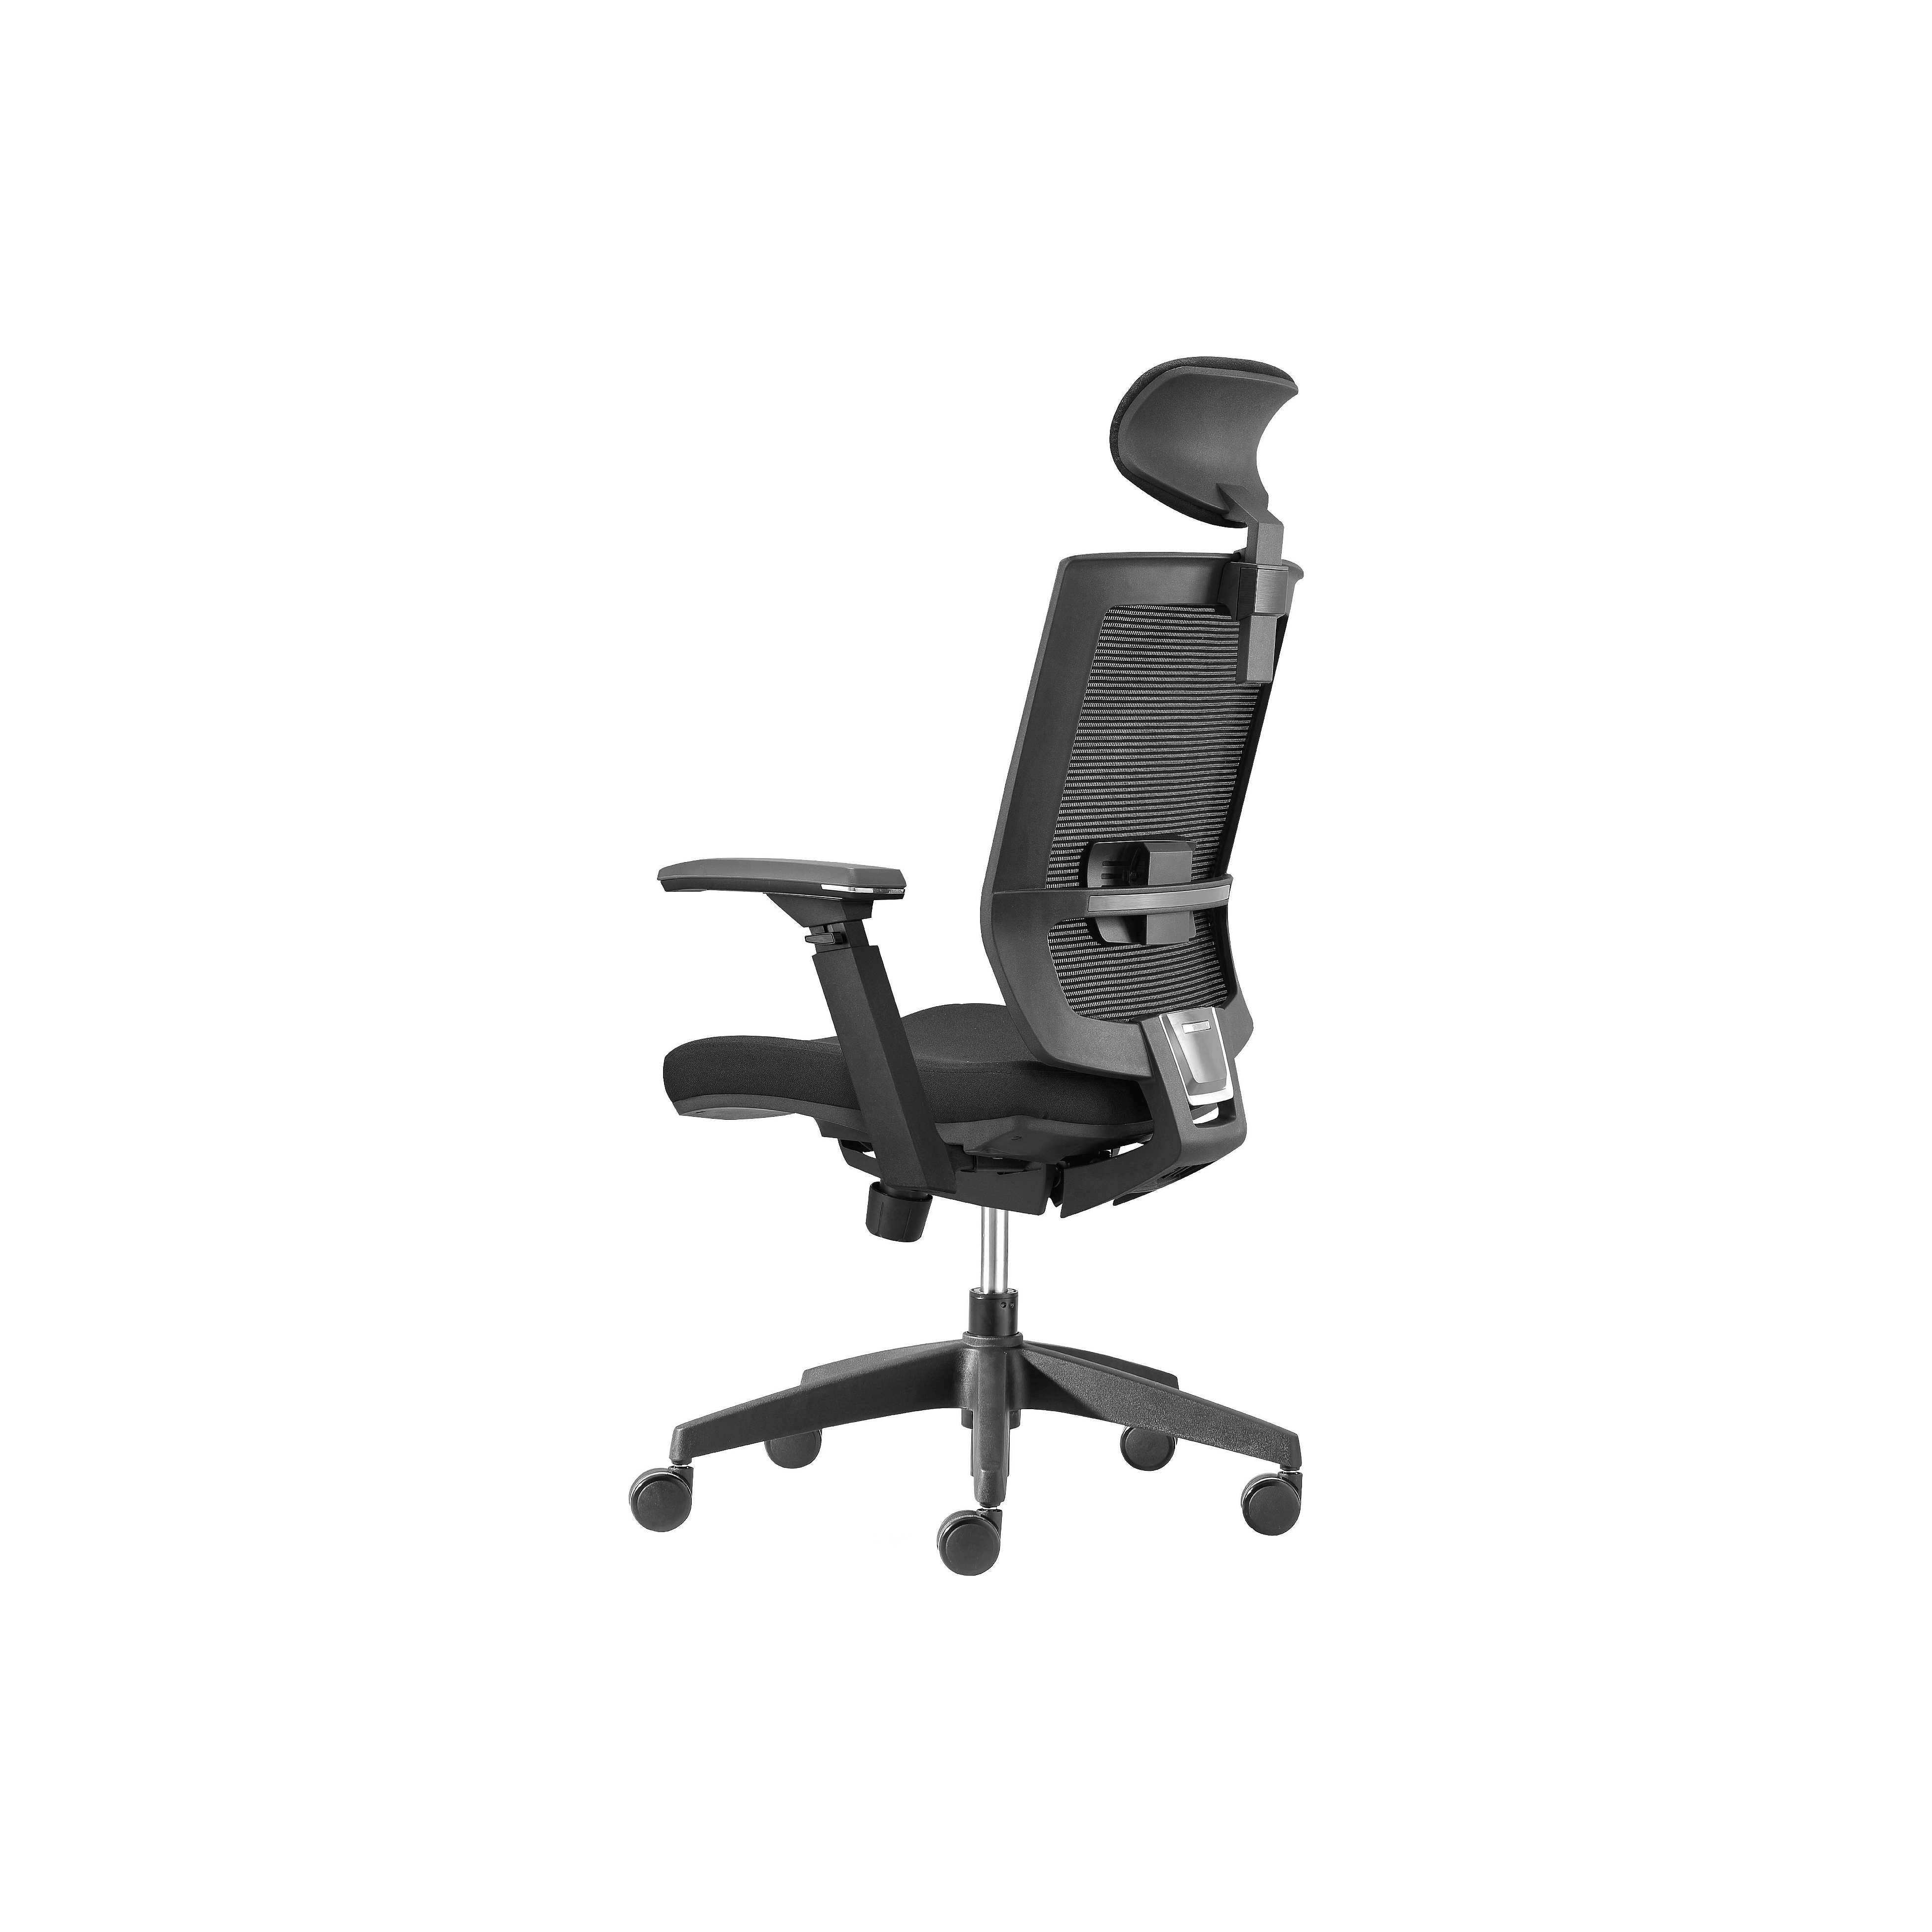 Capri Deluxe Mesh Office Chair With, Deluxe Mesh Ergonomic Office Chair With Headrest